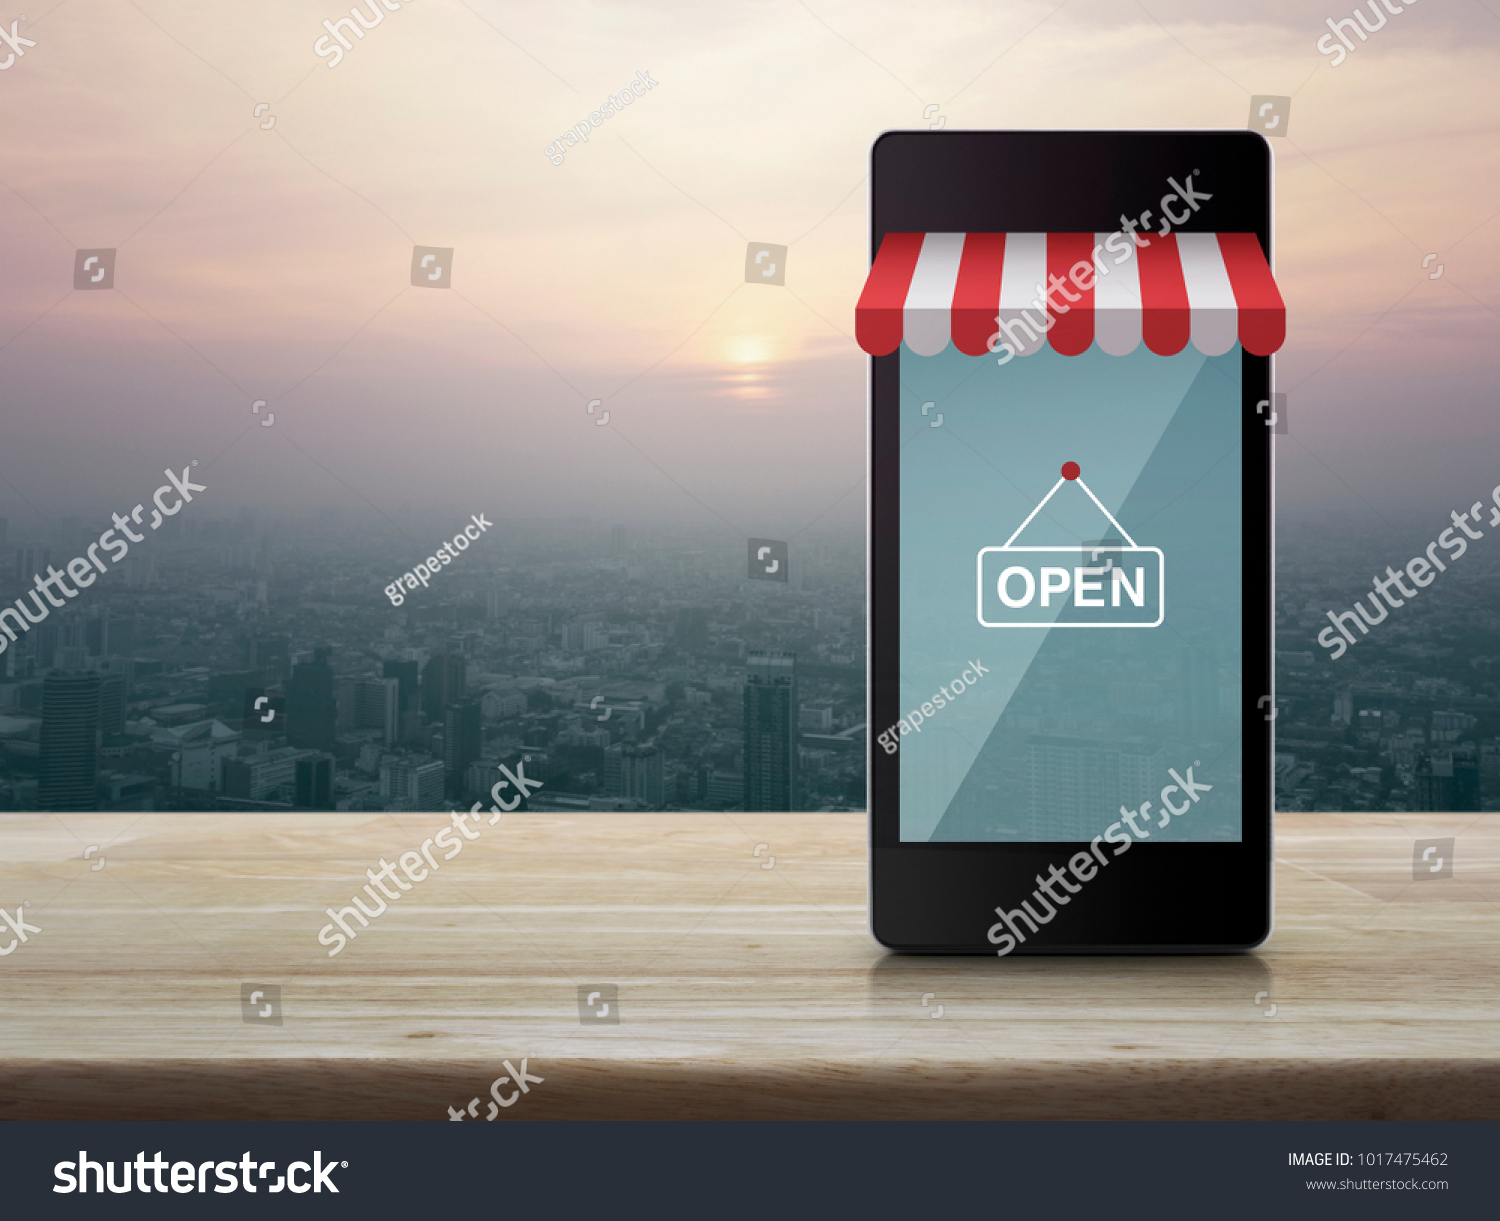 Modern smart mobile phone with on line shopping store graphic and open sign on wooden table over city tower at sunset, vintage style, Shop online concept #1017475462